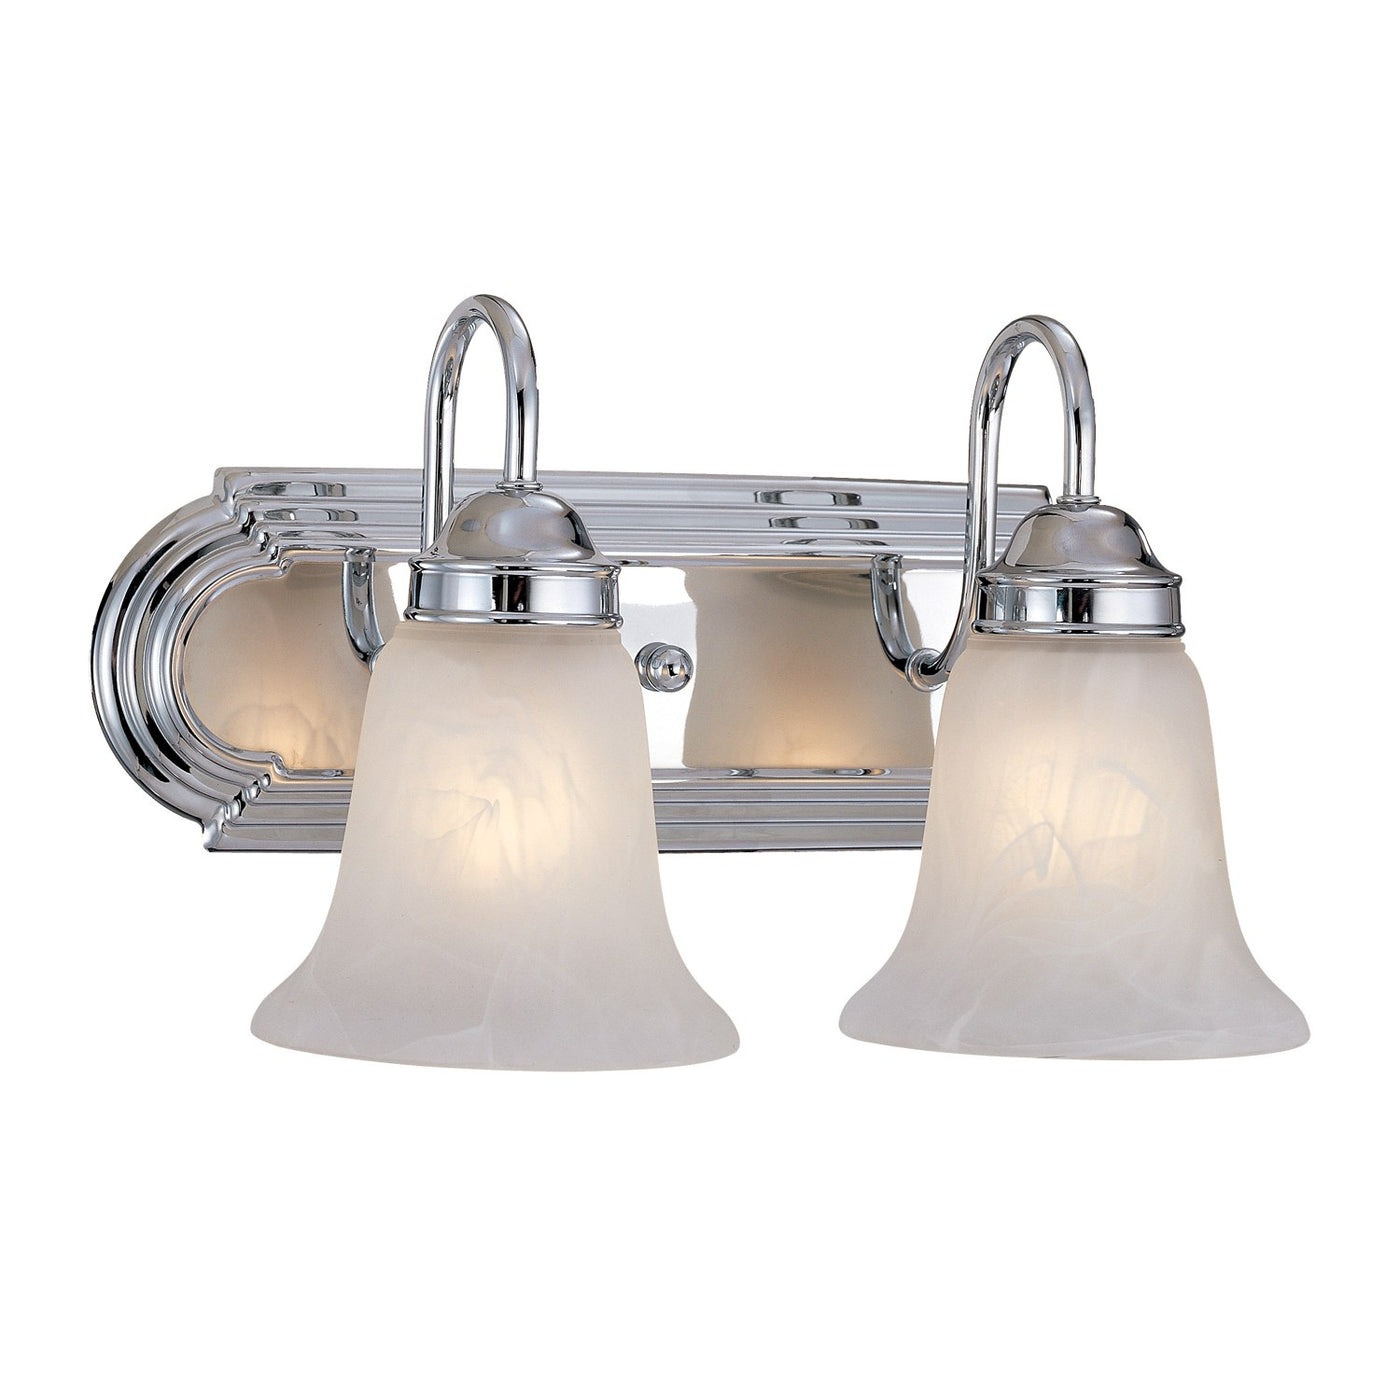 Millennium Lightings Vanity Offered in Chrome finish, Item Number 482-CH